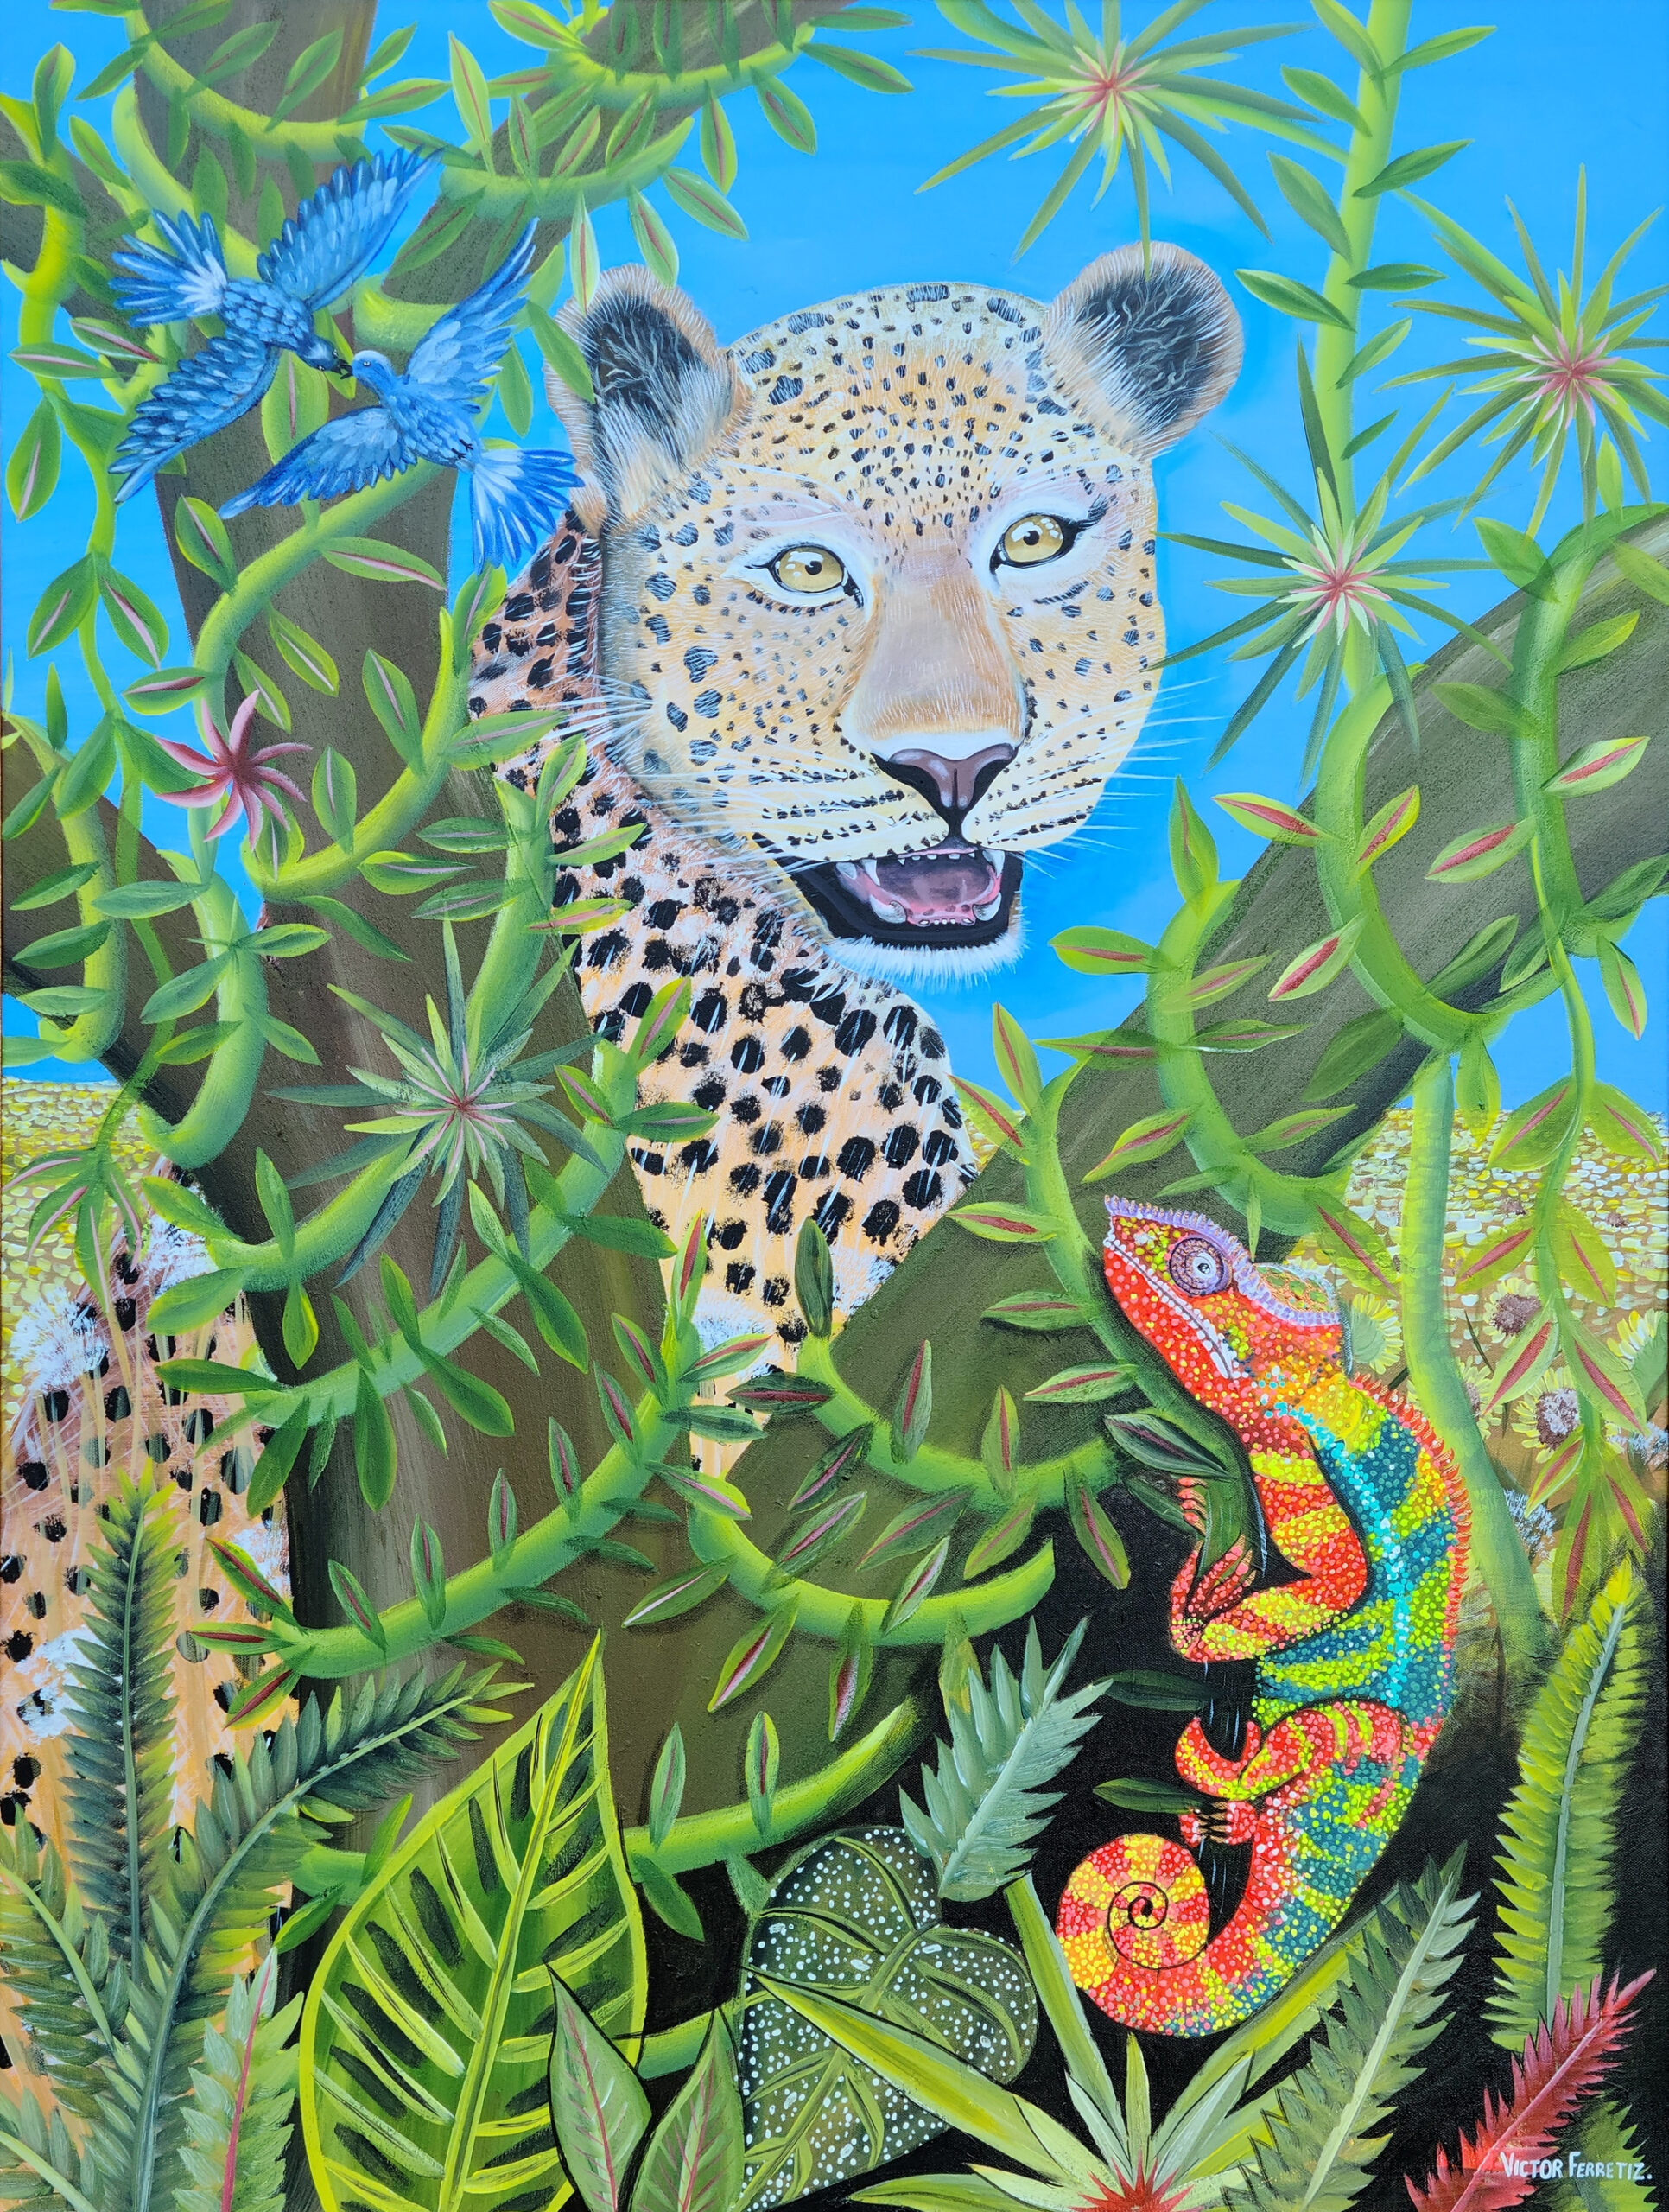 Ornate frame included. This frame might have minor scratches due to age. This original artwork depicts flora and fauna in a surreal style of plants and animals such as reptiles, mammals, and aviaries. The vibrant chameleon colors represent the irony of not hiding from the fears of life but also challenging them with all its courage. Birds represent freedom and harmony in life. The leopard represents the fear of many out there. 